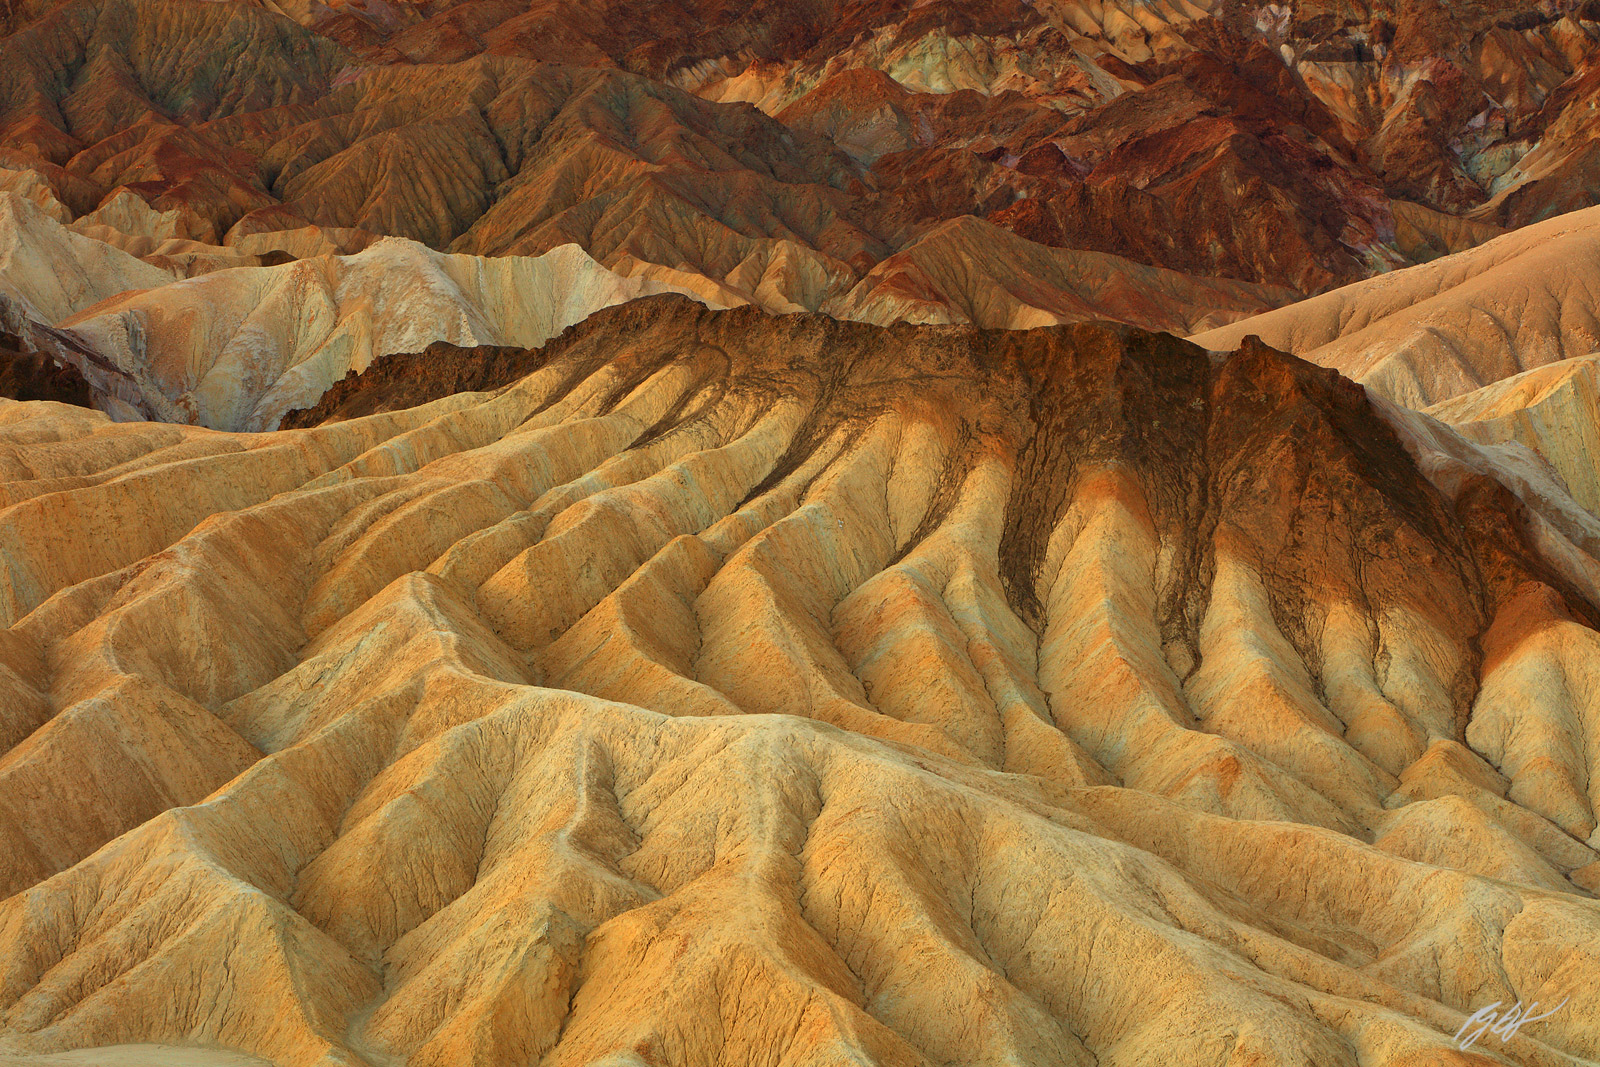 Alluvial Fans from Zabriskie Point in Death Valley National Park in California